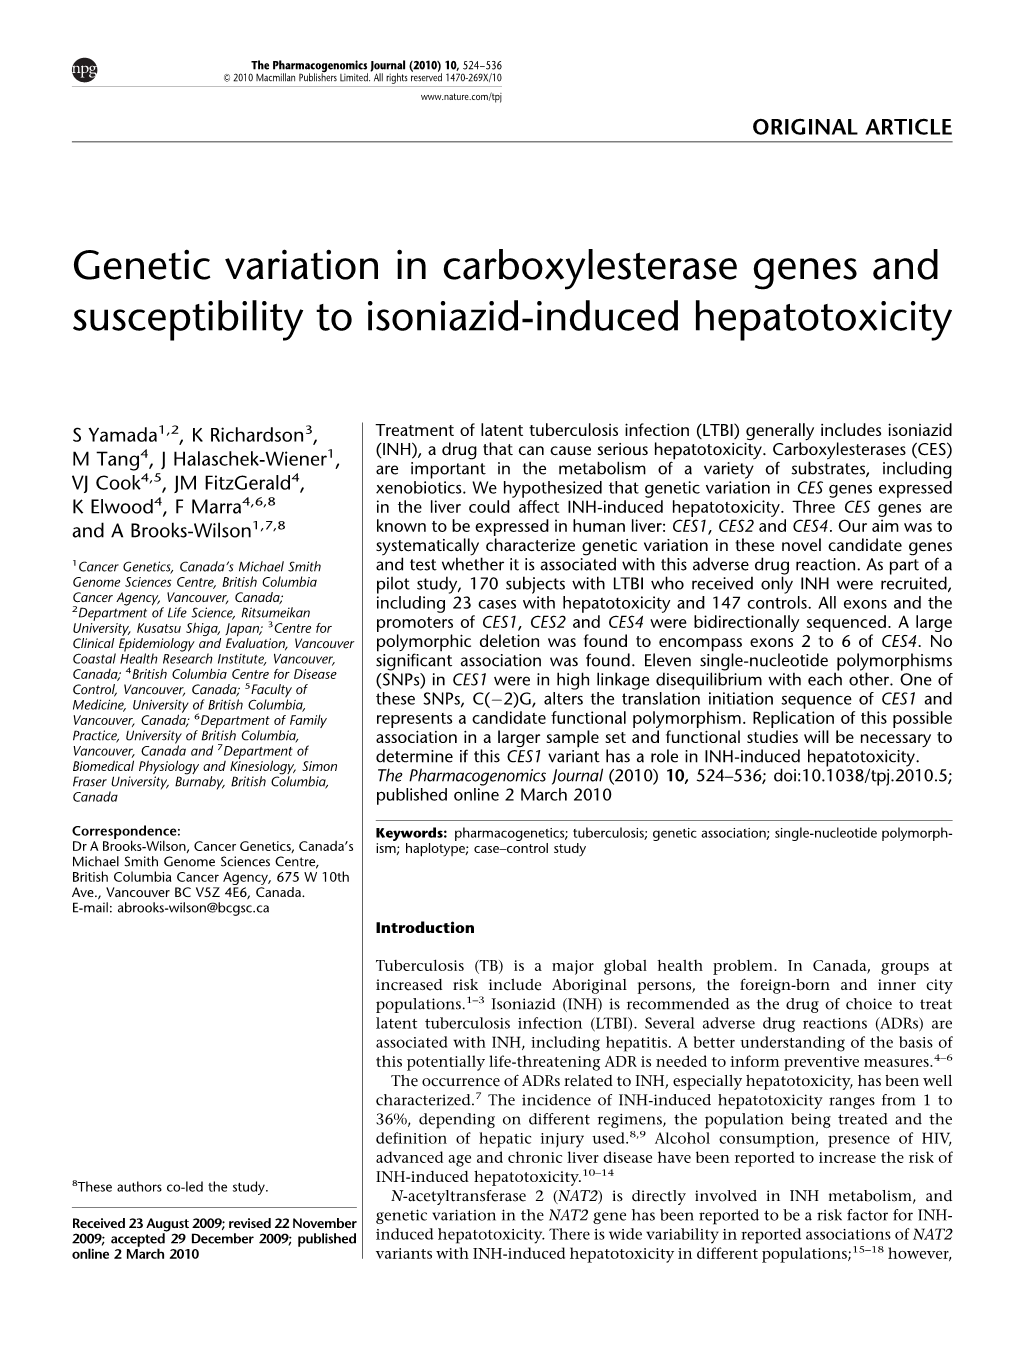 Genetic Variation in Carboxylesterase Genes and Susceptibility to Isoniazid-Induced Hepatotoxicity